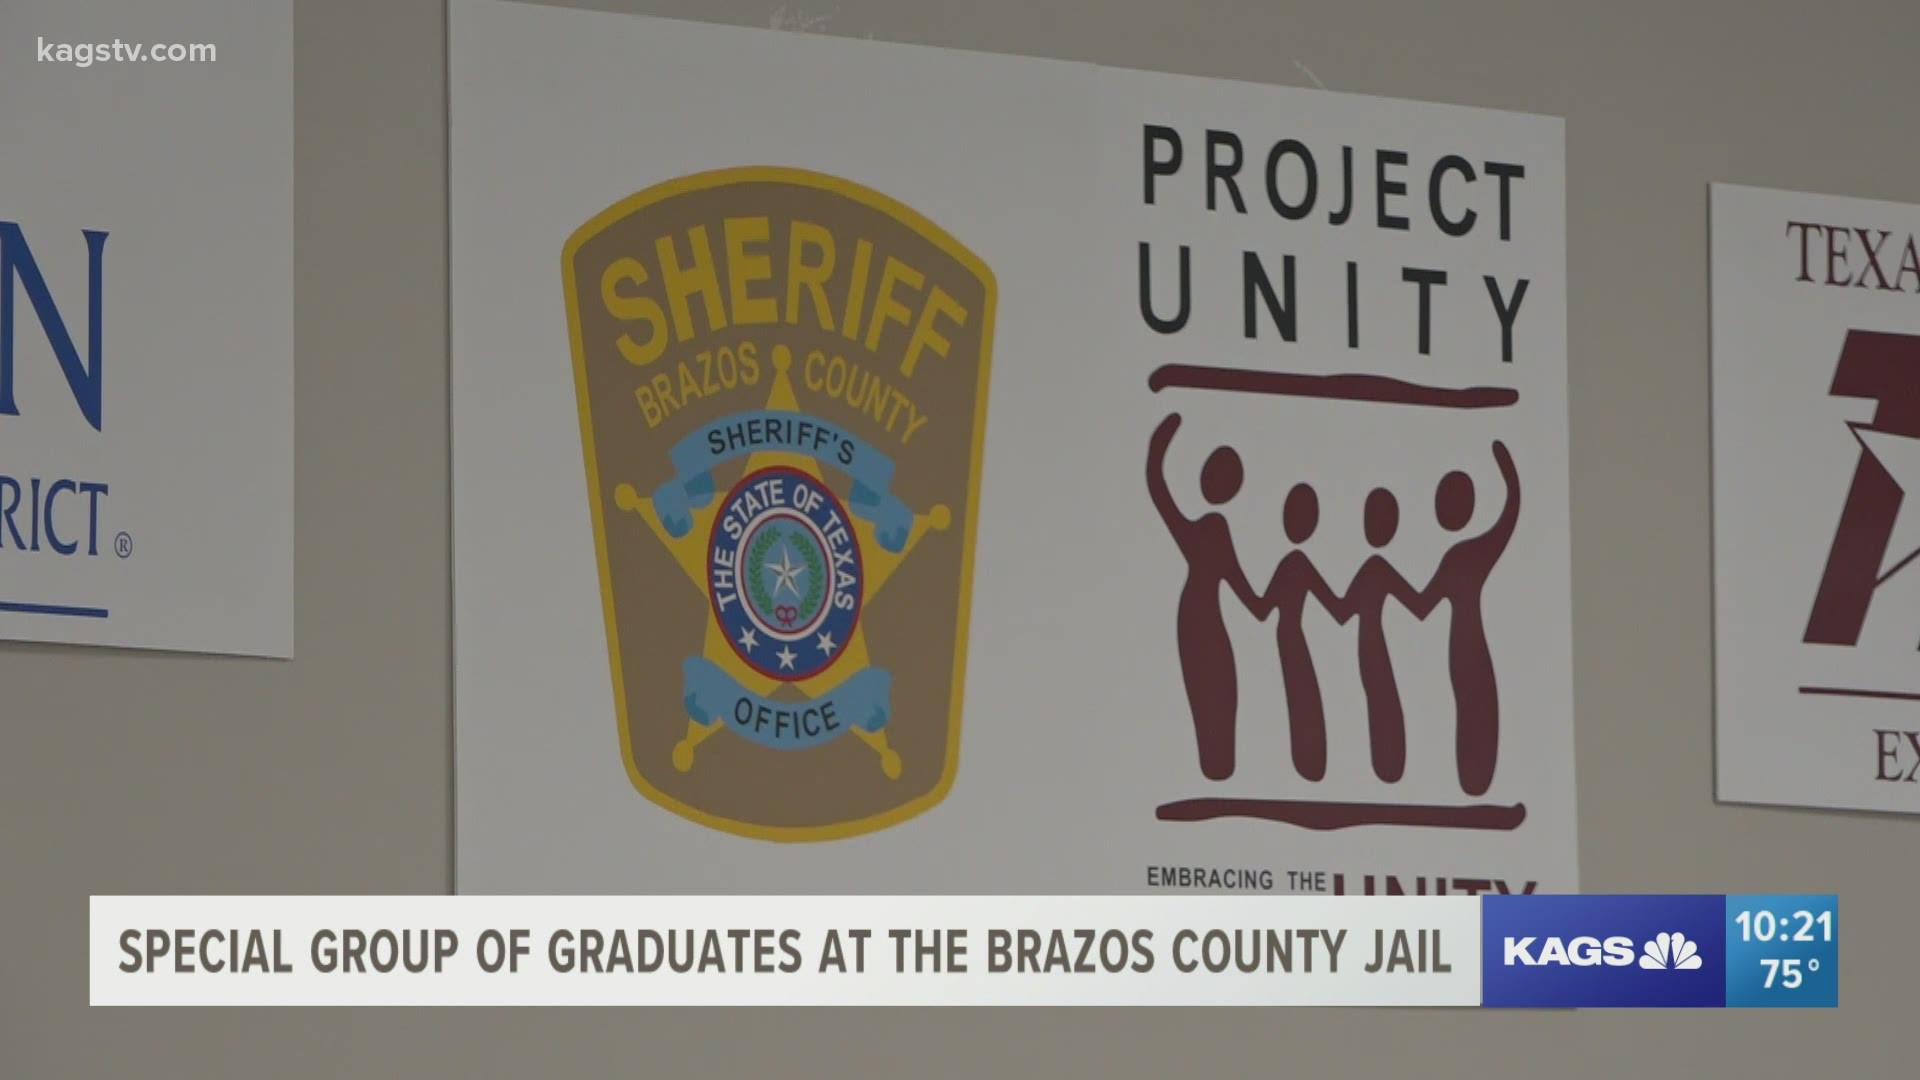 If chosen for the program, inmates participate in a 6-week course designed to help them land a job when they get released.